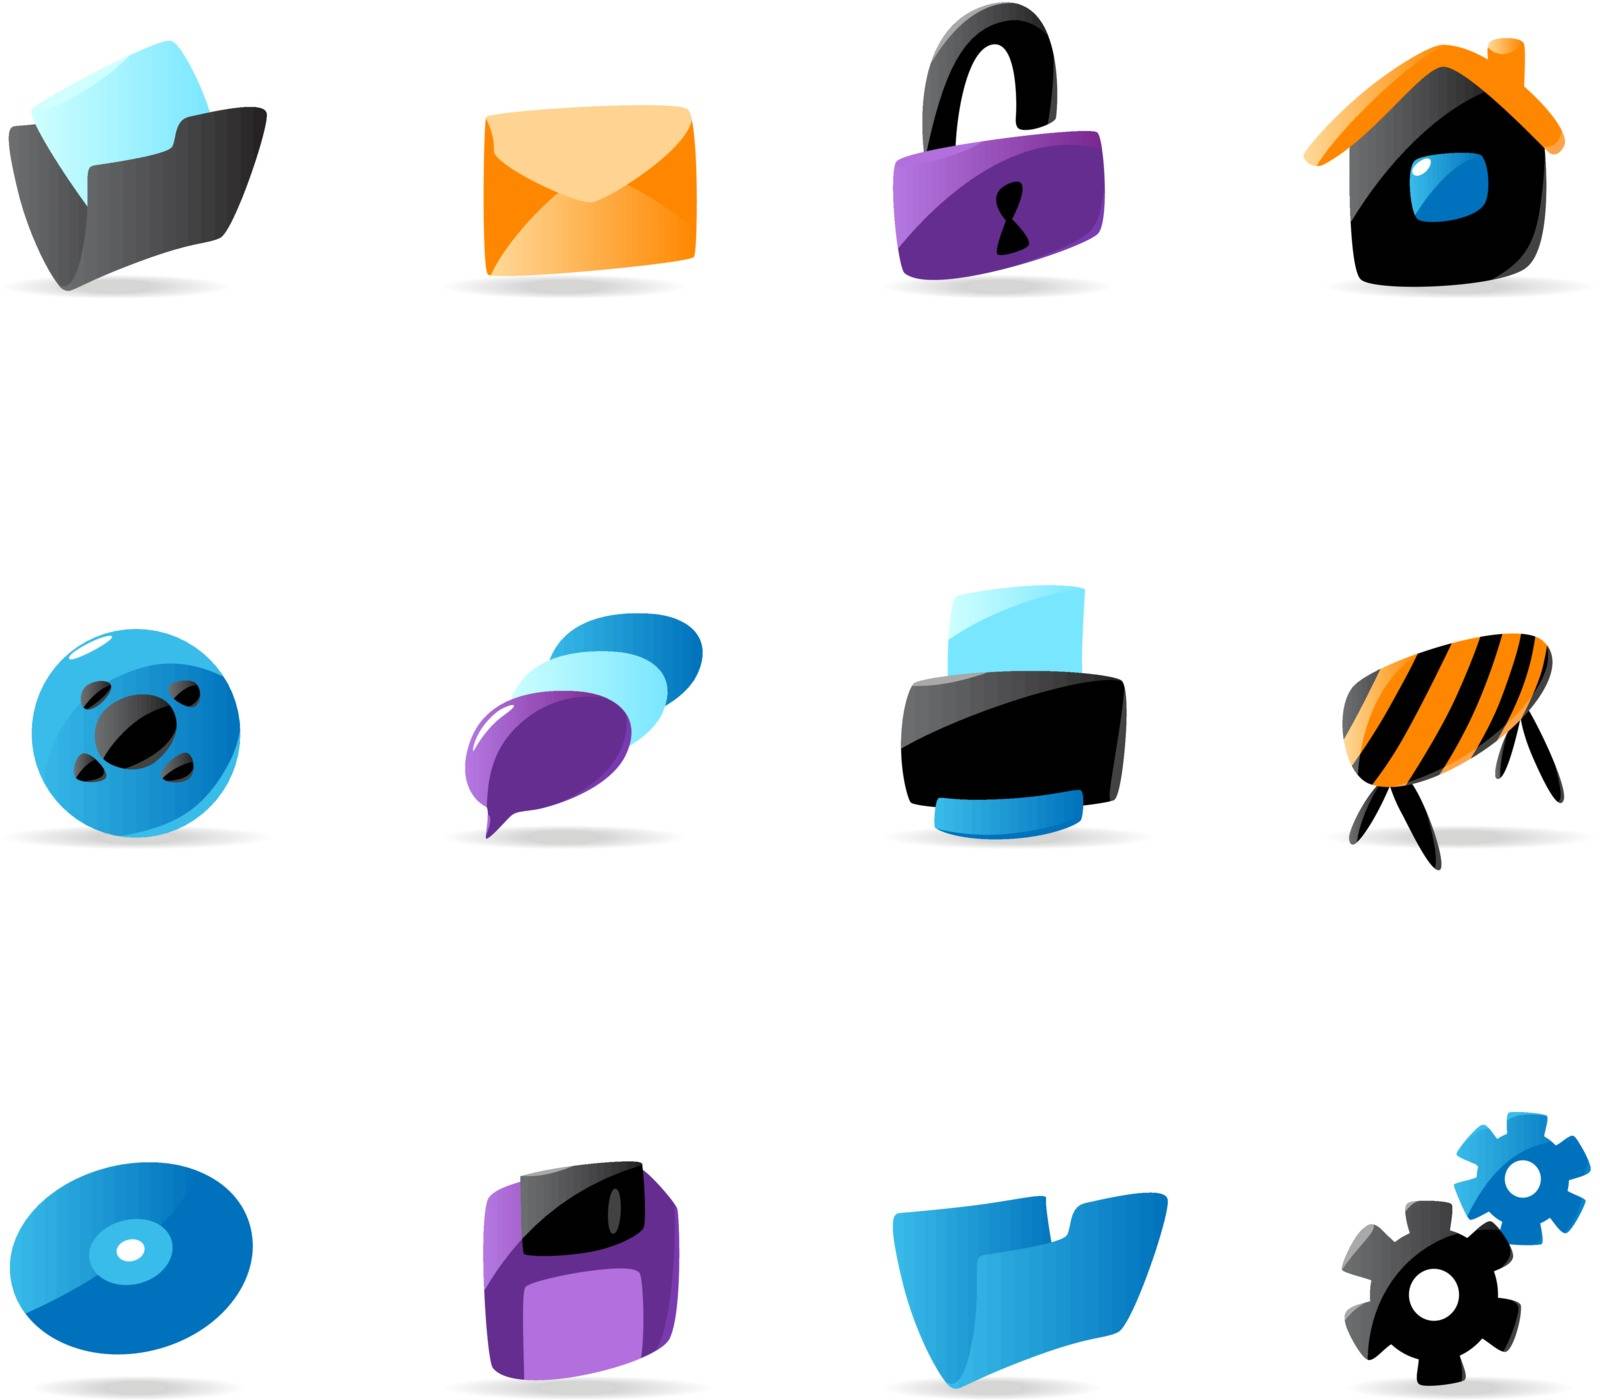 Bright website and interface icons by ildogesto